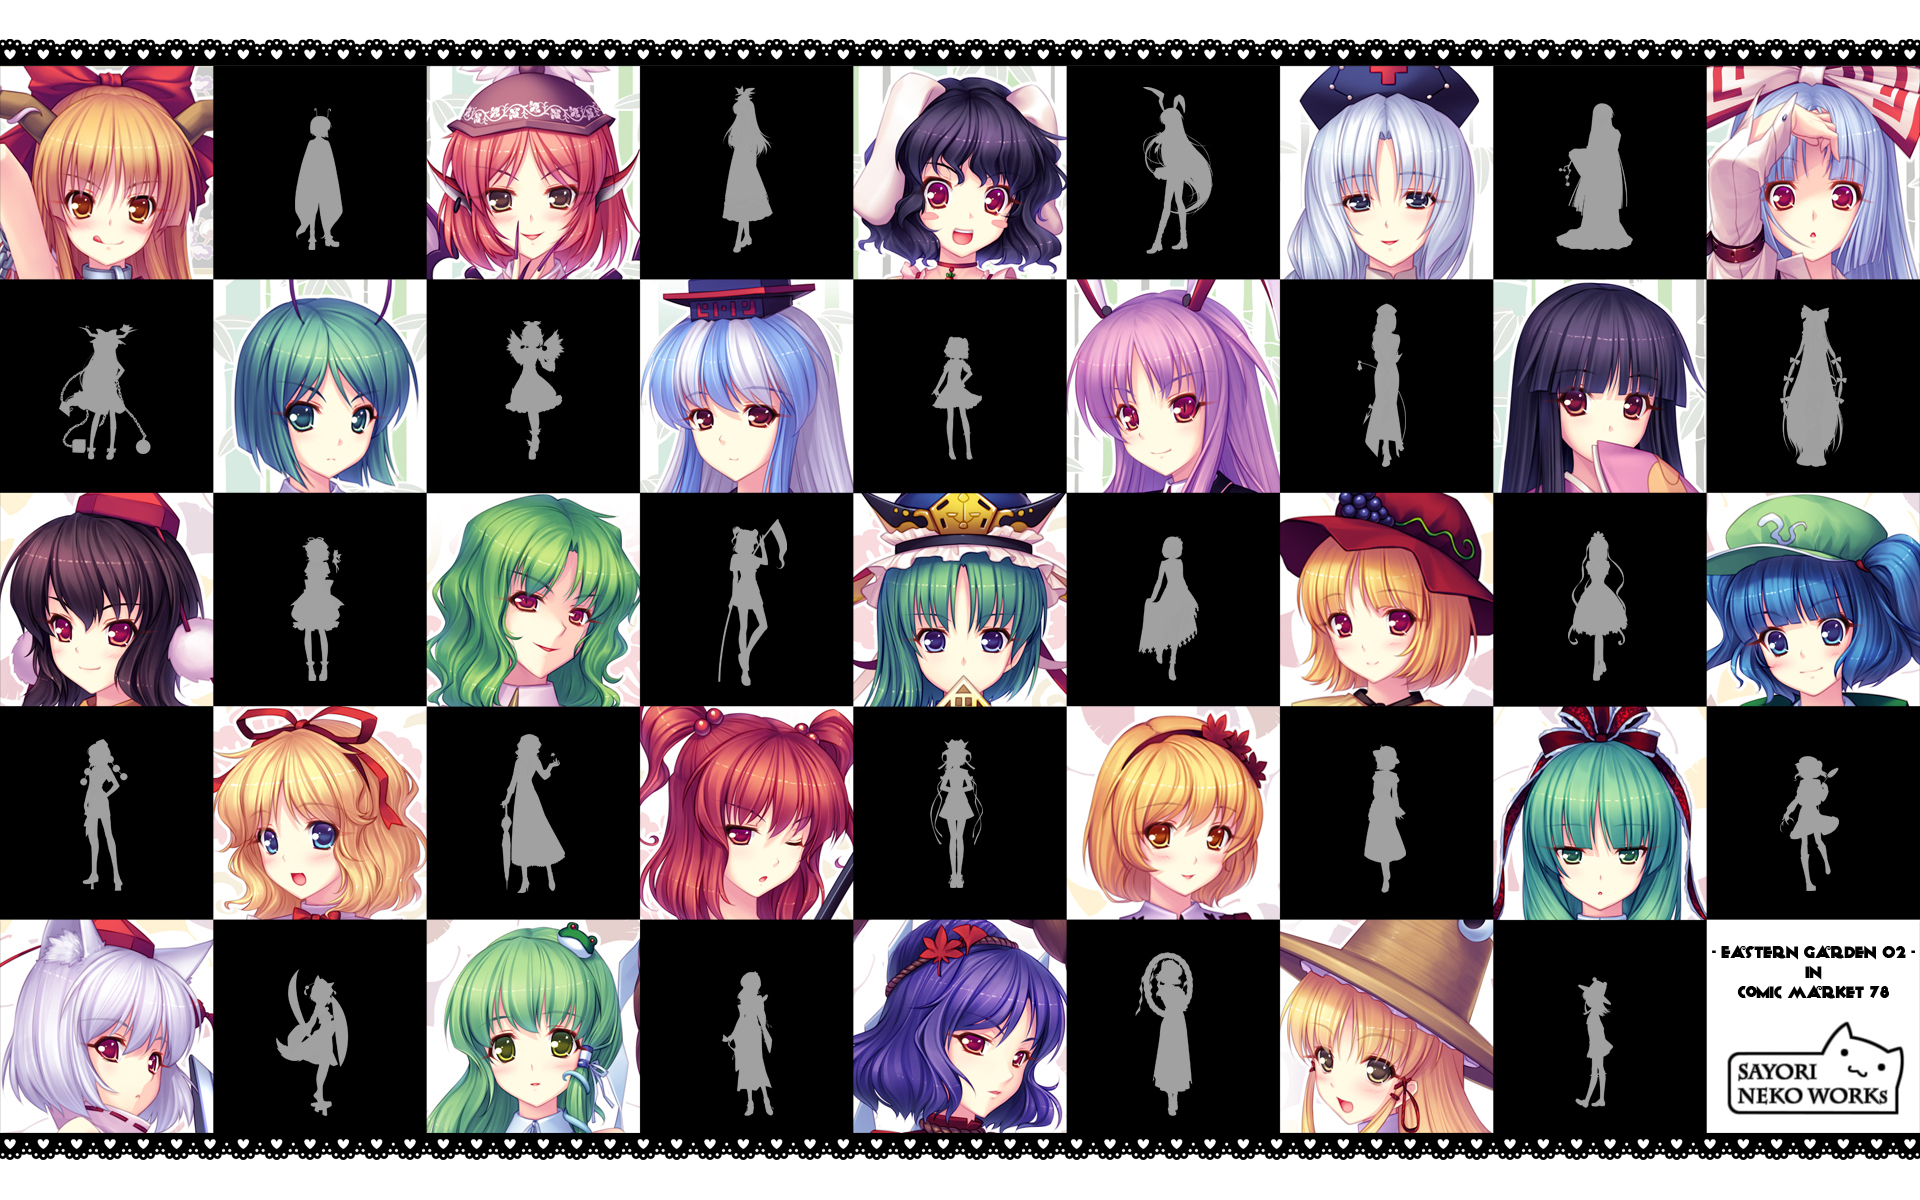 Anime Touhou characters gathered together for a desktop wallpaper.